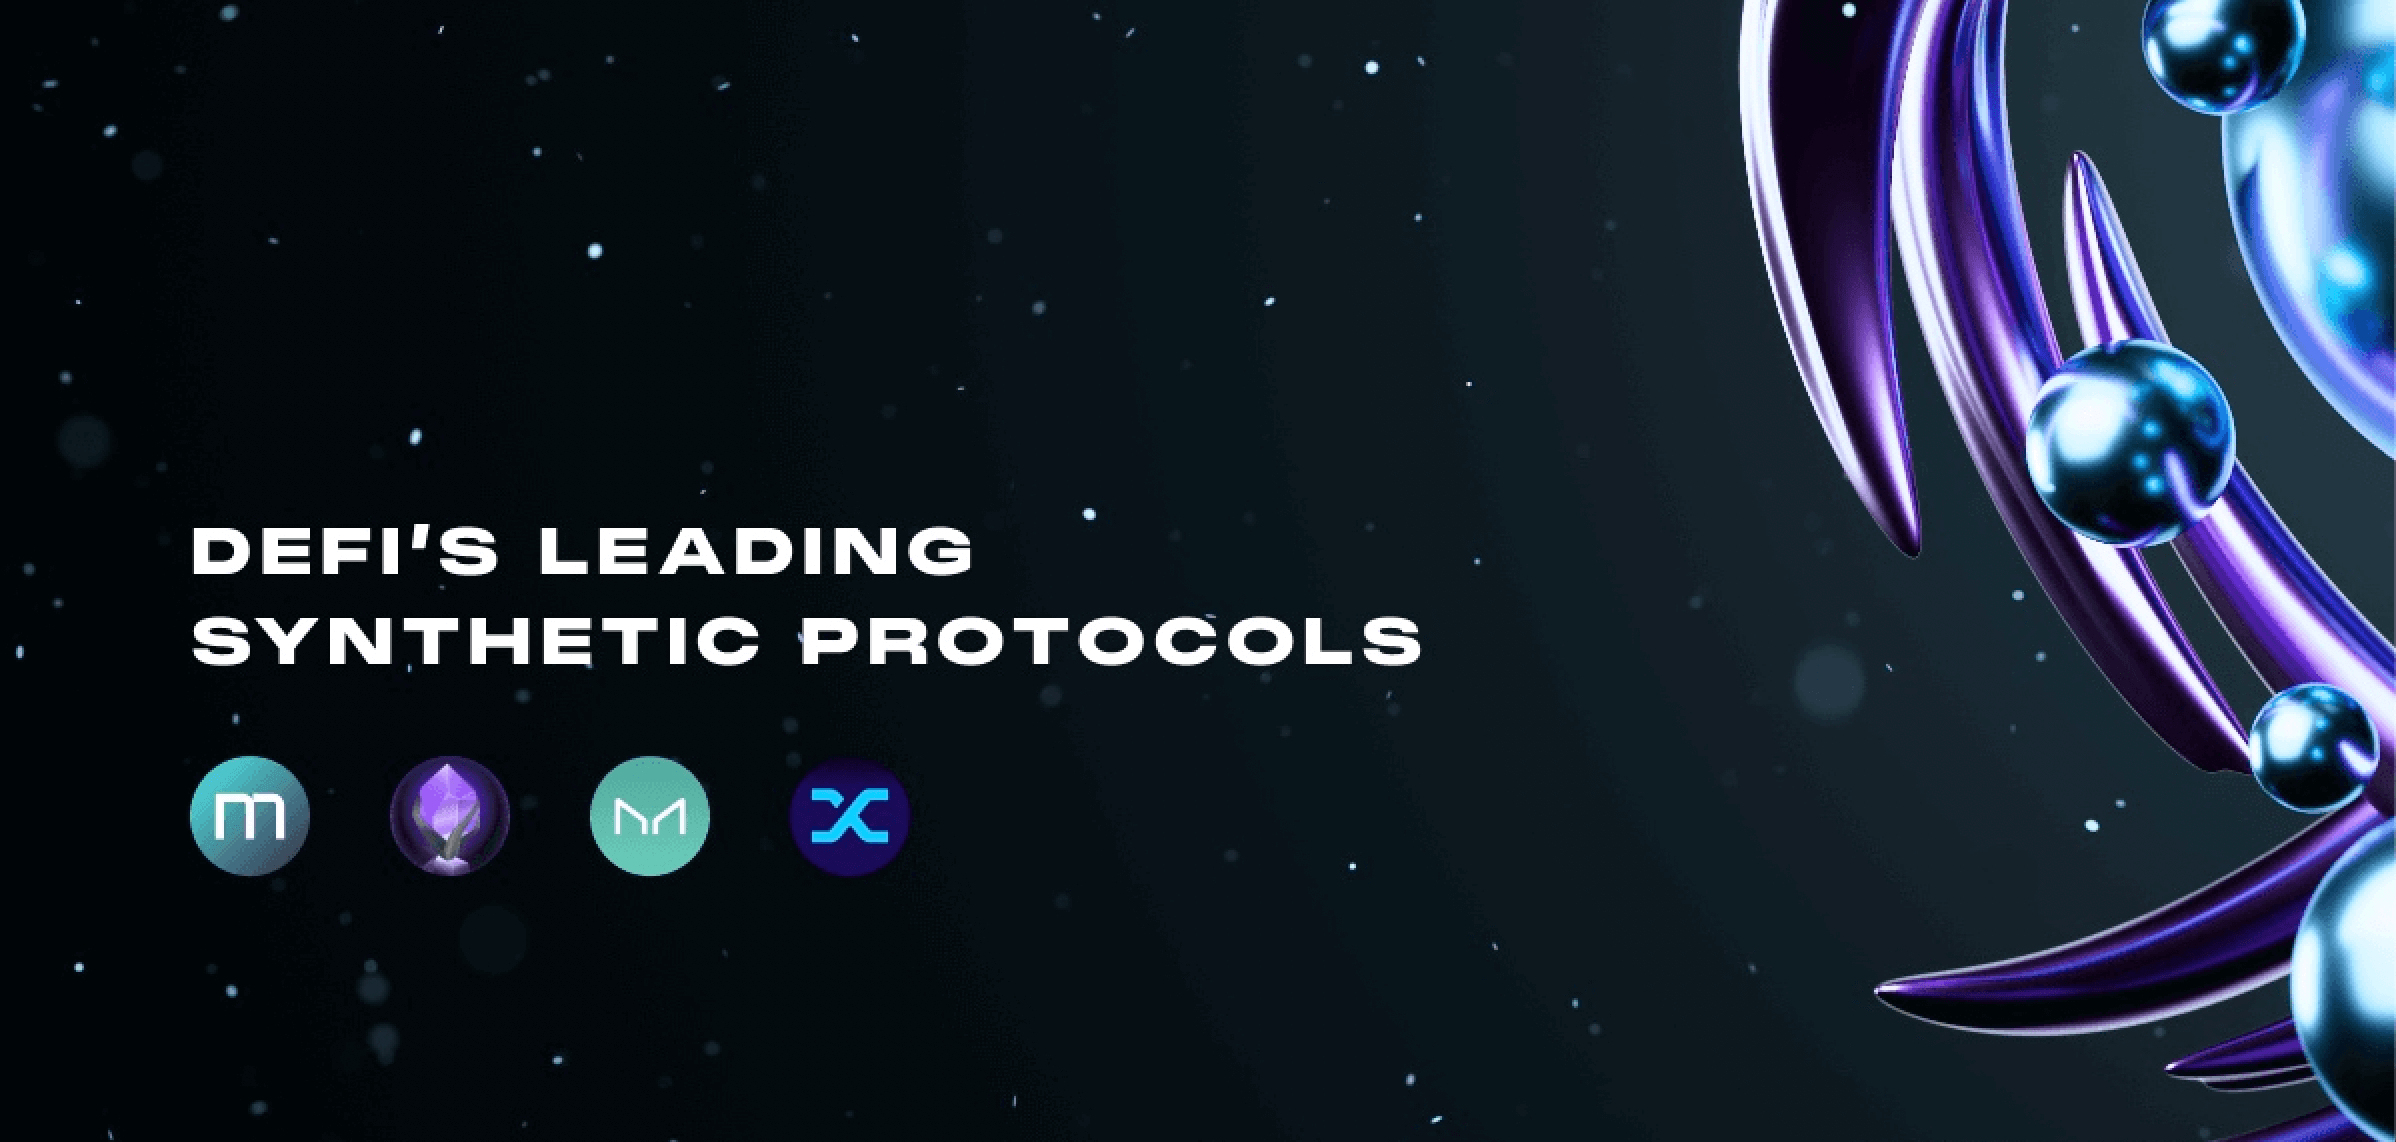 decorative banner about synthetic protocols